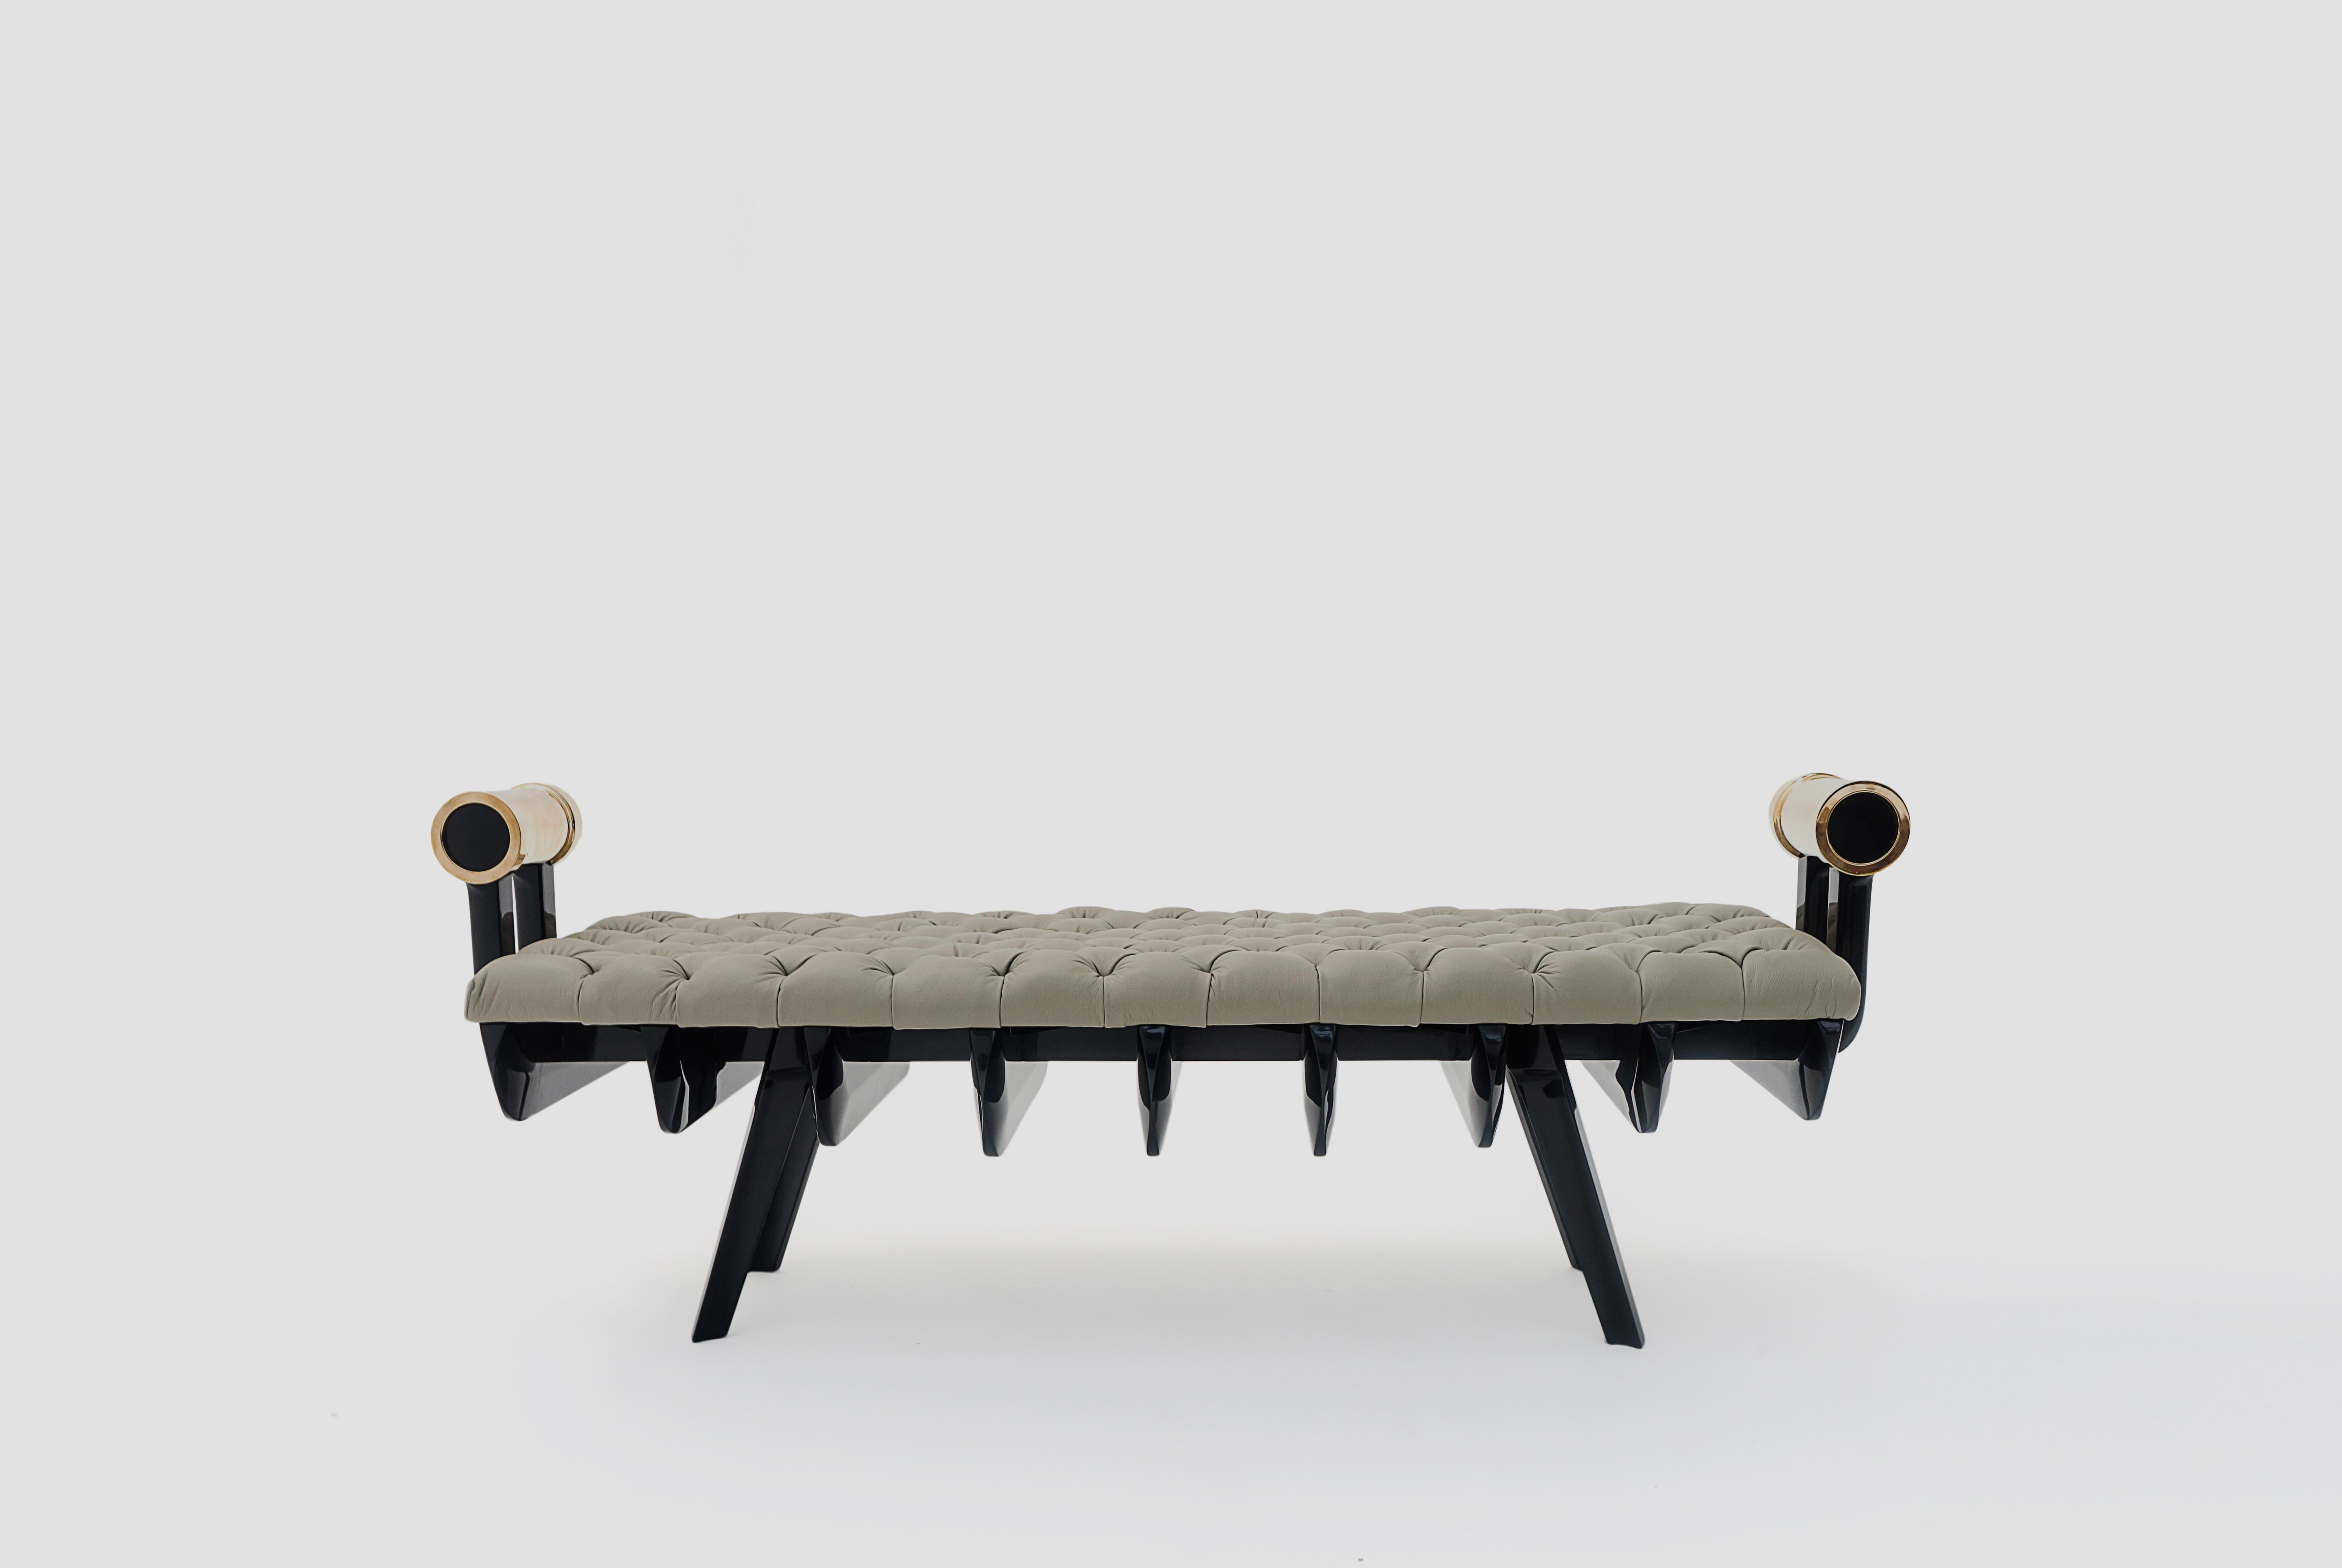 Gor bench by Arturo Verástegui
Dimensions: D 40 x W 120 x H 40 cm
Materials: wood, leather, bronze.

Bench made of lacquered polished wood with bronce handles, seating in leather.

Arturo Verástegui has been the director and founder of BREUER